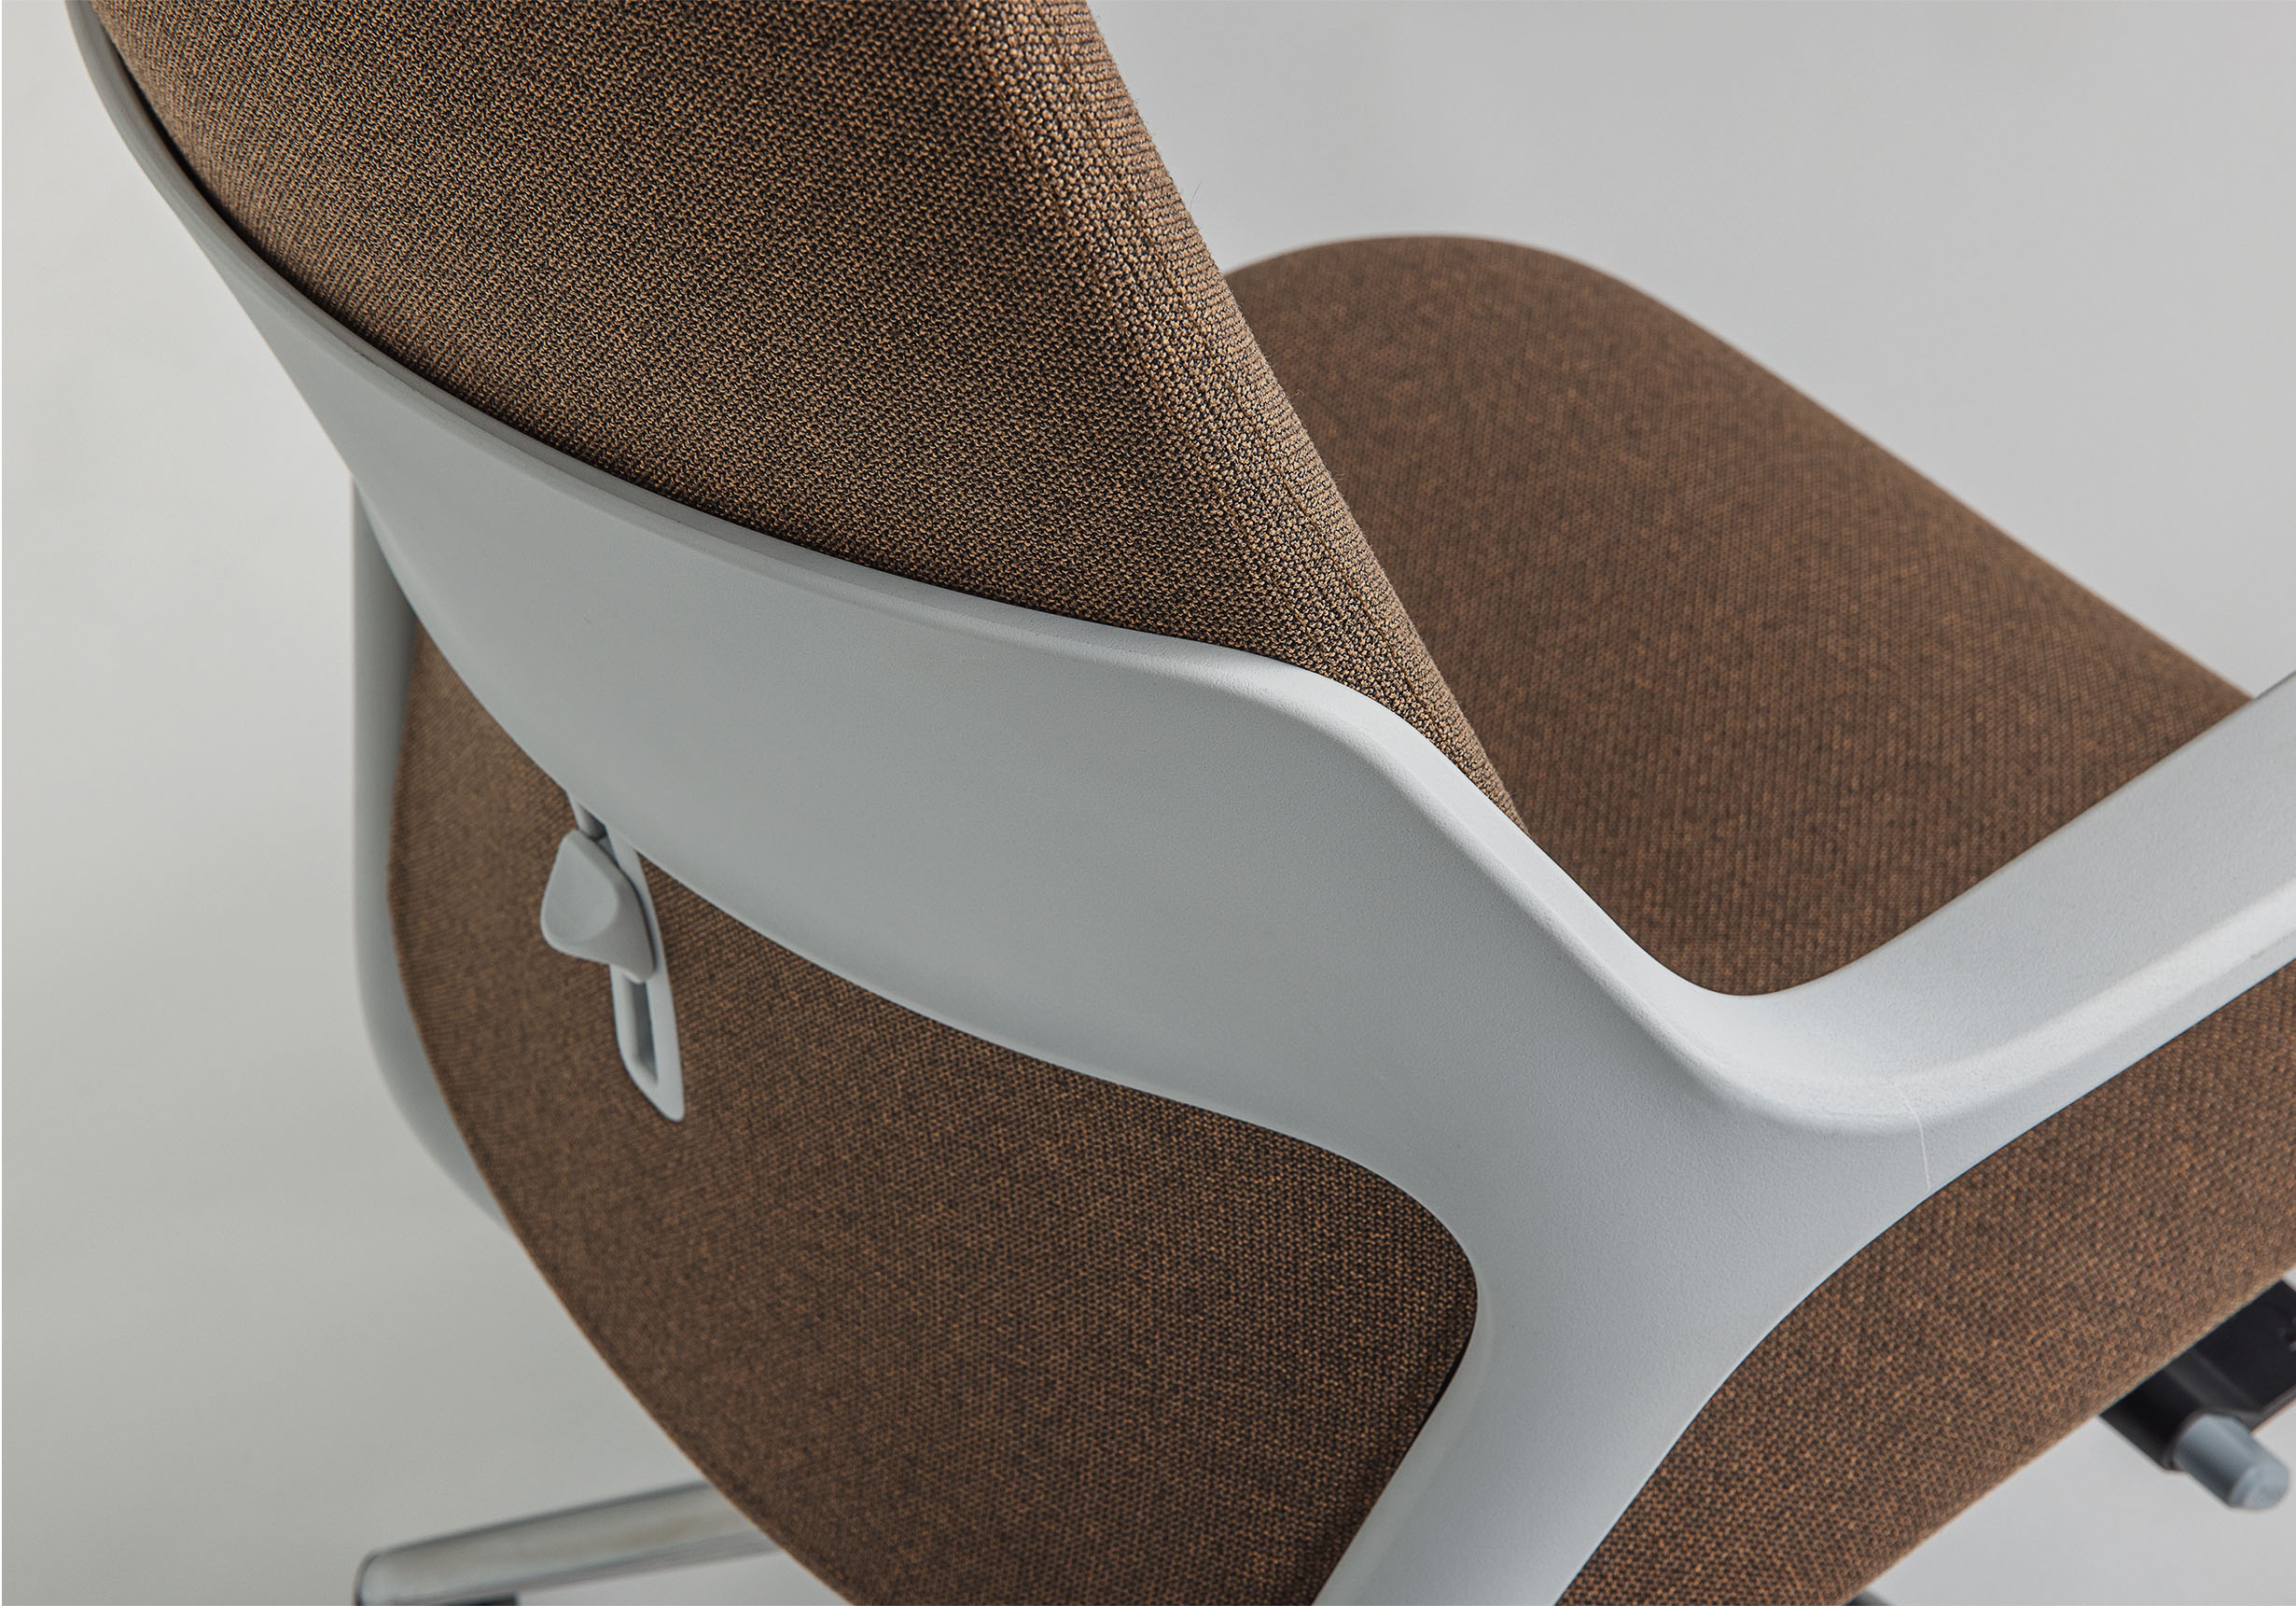 Close-up of the back of an OFY chair in brown, designed by Alegre Design for Narbutas. The image highlights the ergonomic thermoplastic backrest and the button for adjustable lumbar support, ideal for enhancing comfort in hybrid and modern workspaces.